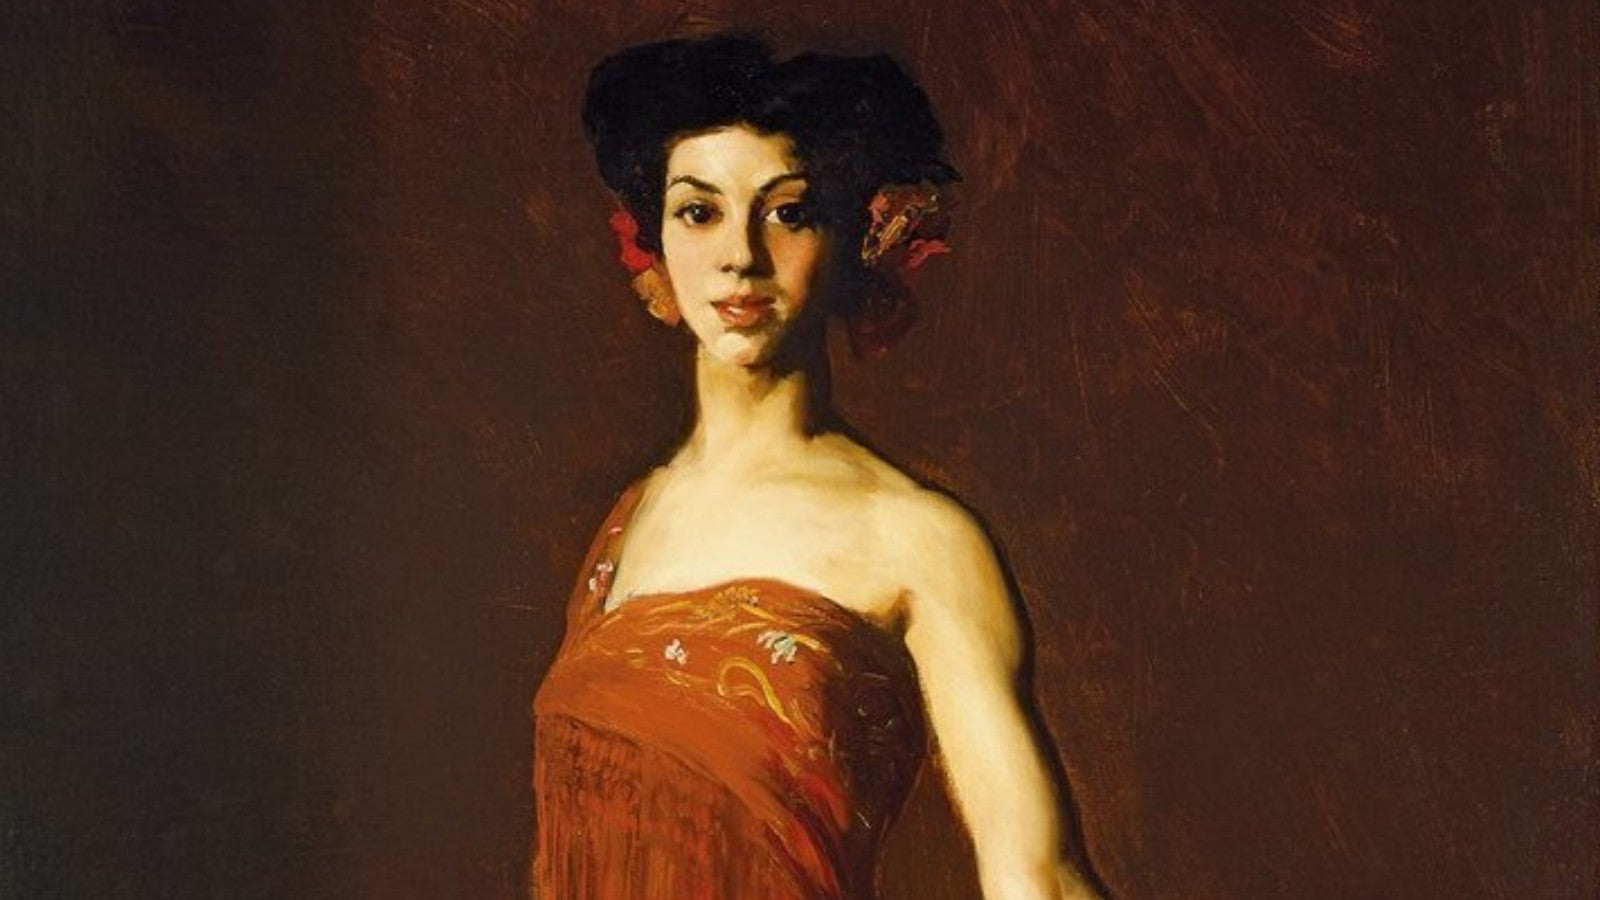 Seviliana (Dancer with Castanet) painting by Robert Henri (1904)